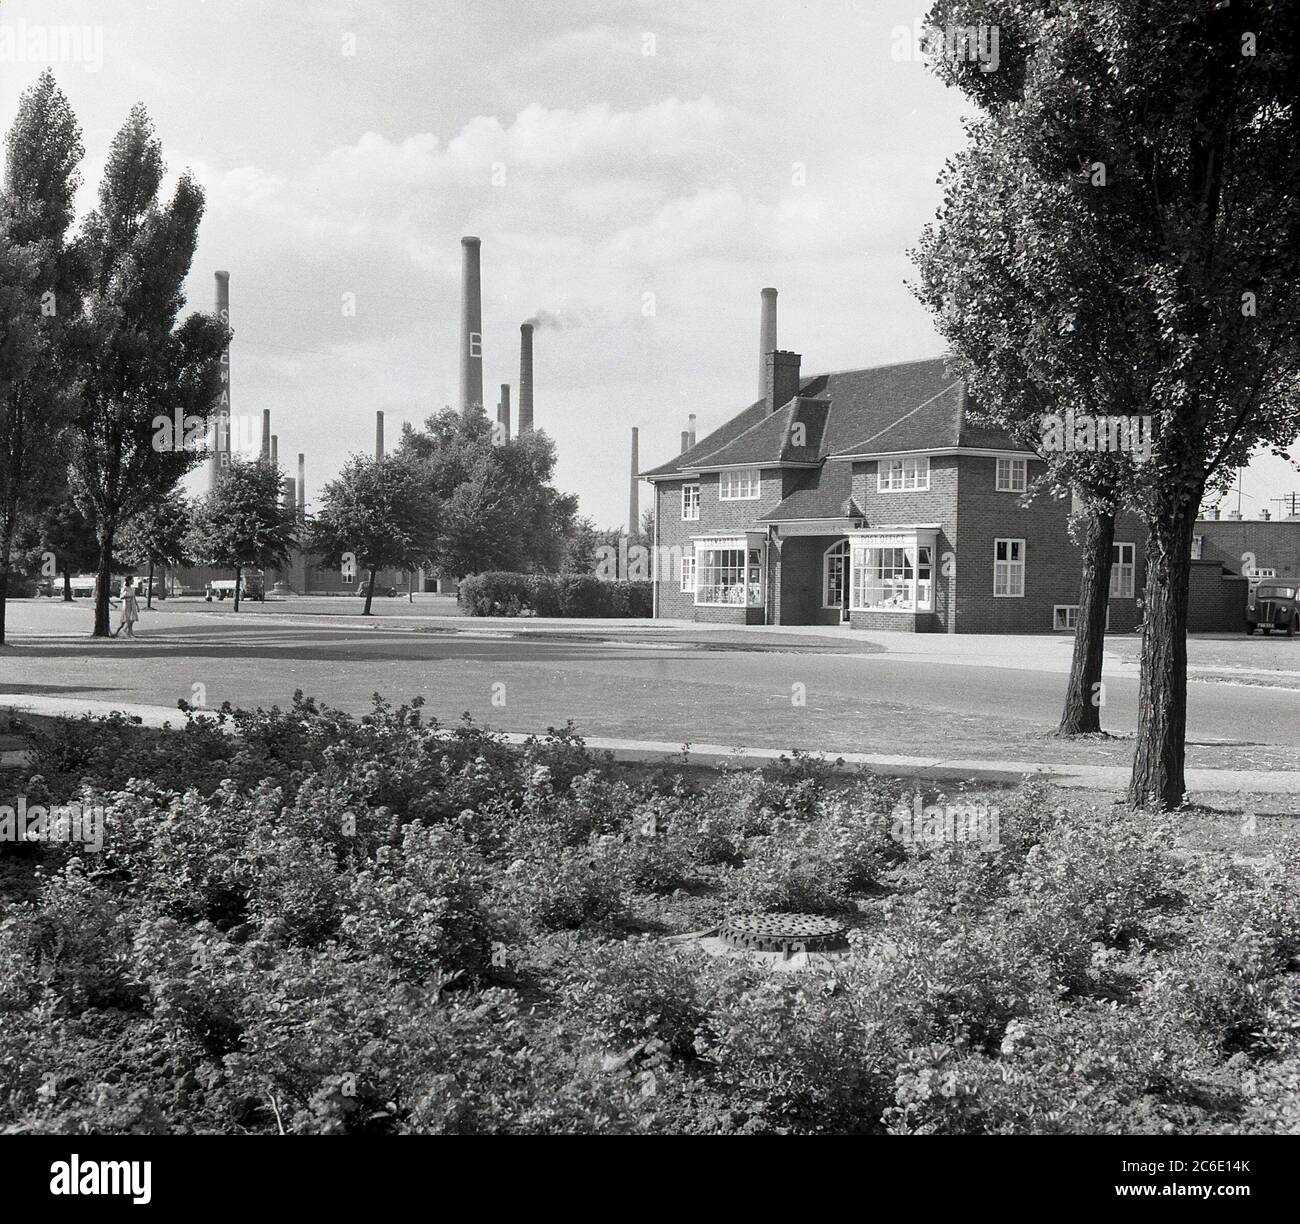 1950s, historical picture showing the 'Co-Operative' store and Post Office at the model village of Stewartby, Bedfordshire, the site of the London Brick Company, at the time, the largest brickworks in the world.  Several of the giant industral chimneys from the brickfiring kilns can be seen in the background. The Stewart family, owners of London Bricks were paternal employers and provided their large workforce with housing and sports and leisure facilities, carrying on a tradition started by the Quaker families of the previous century. Stock Photo